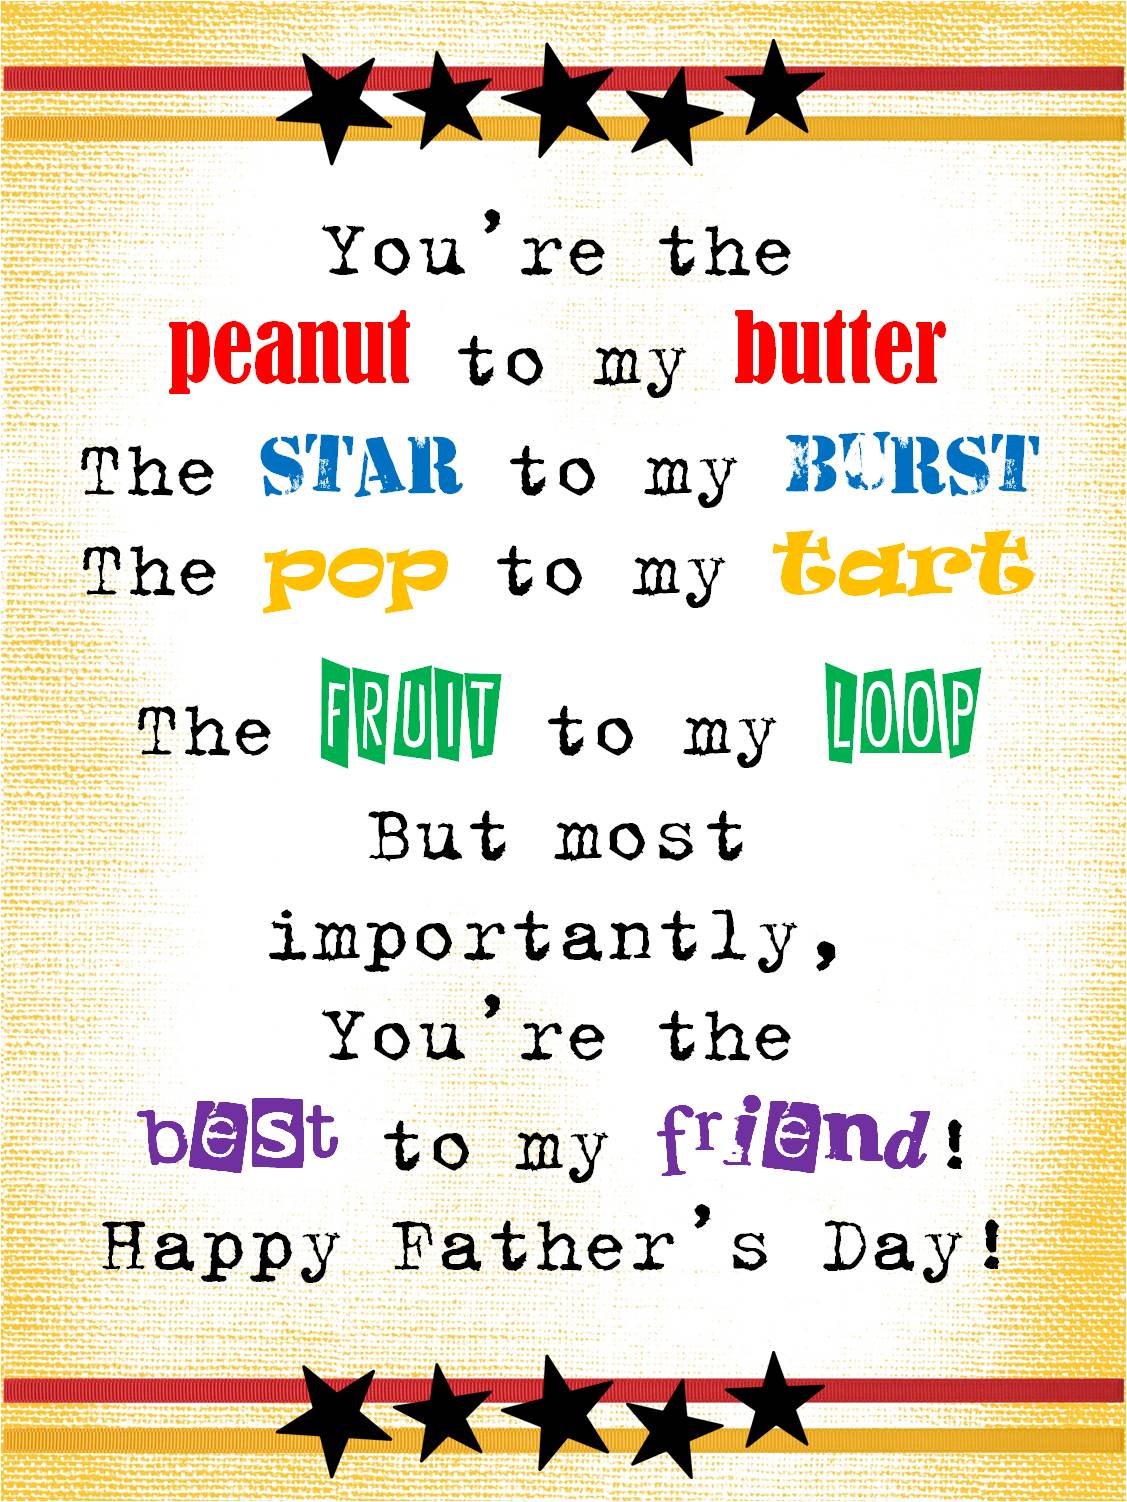 Strong Armor Father s Day Poem You re The Peanut To My Butter 